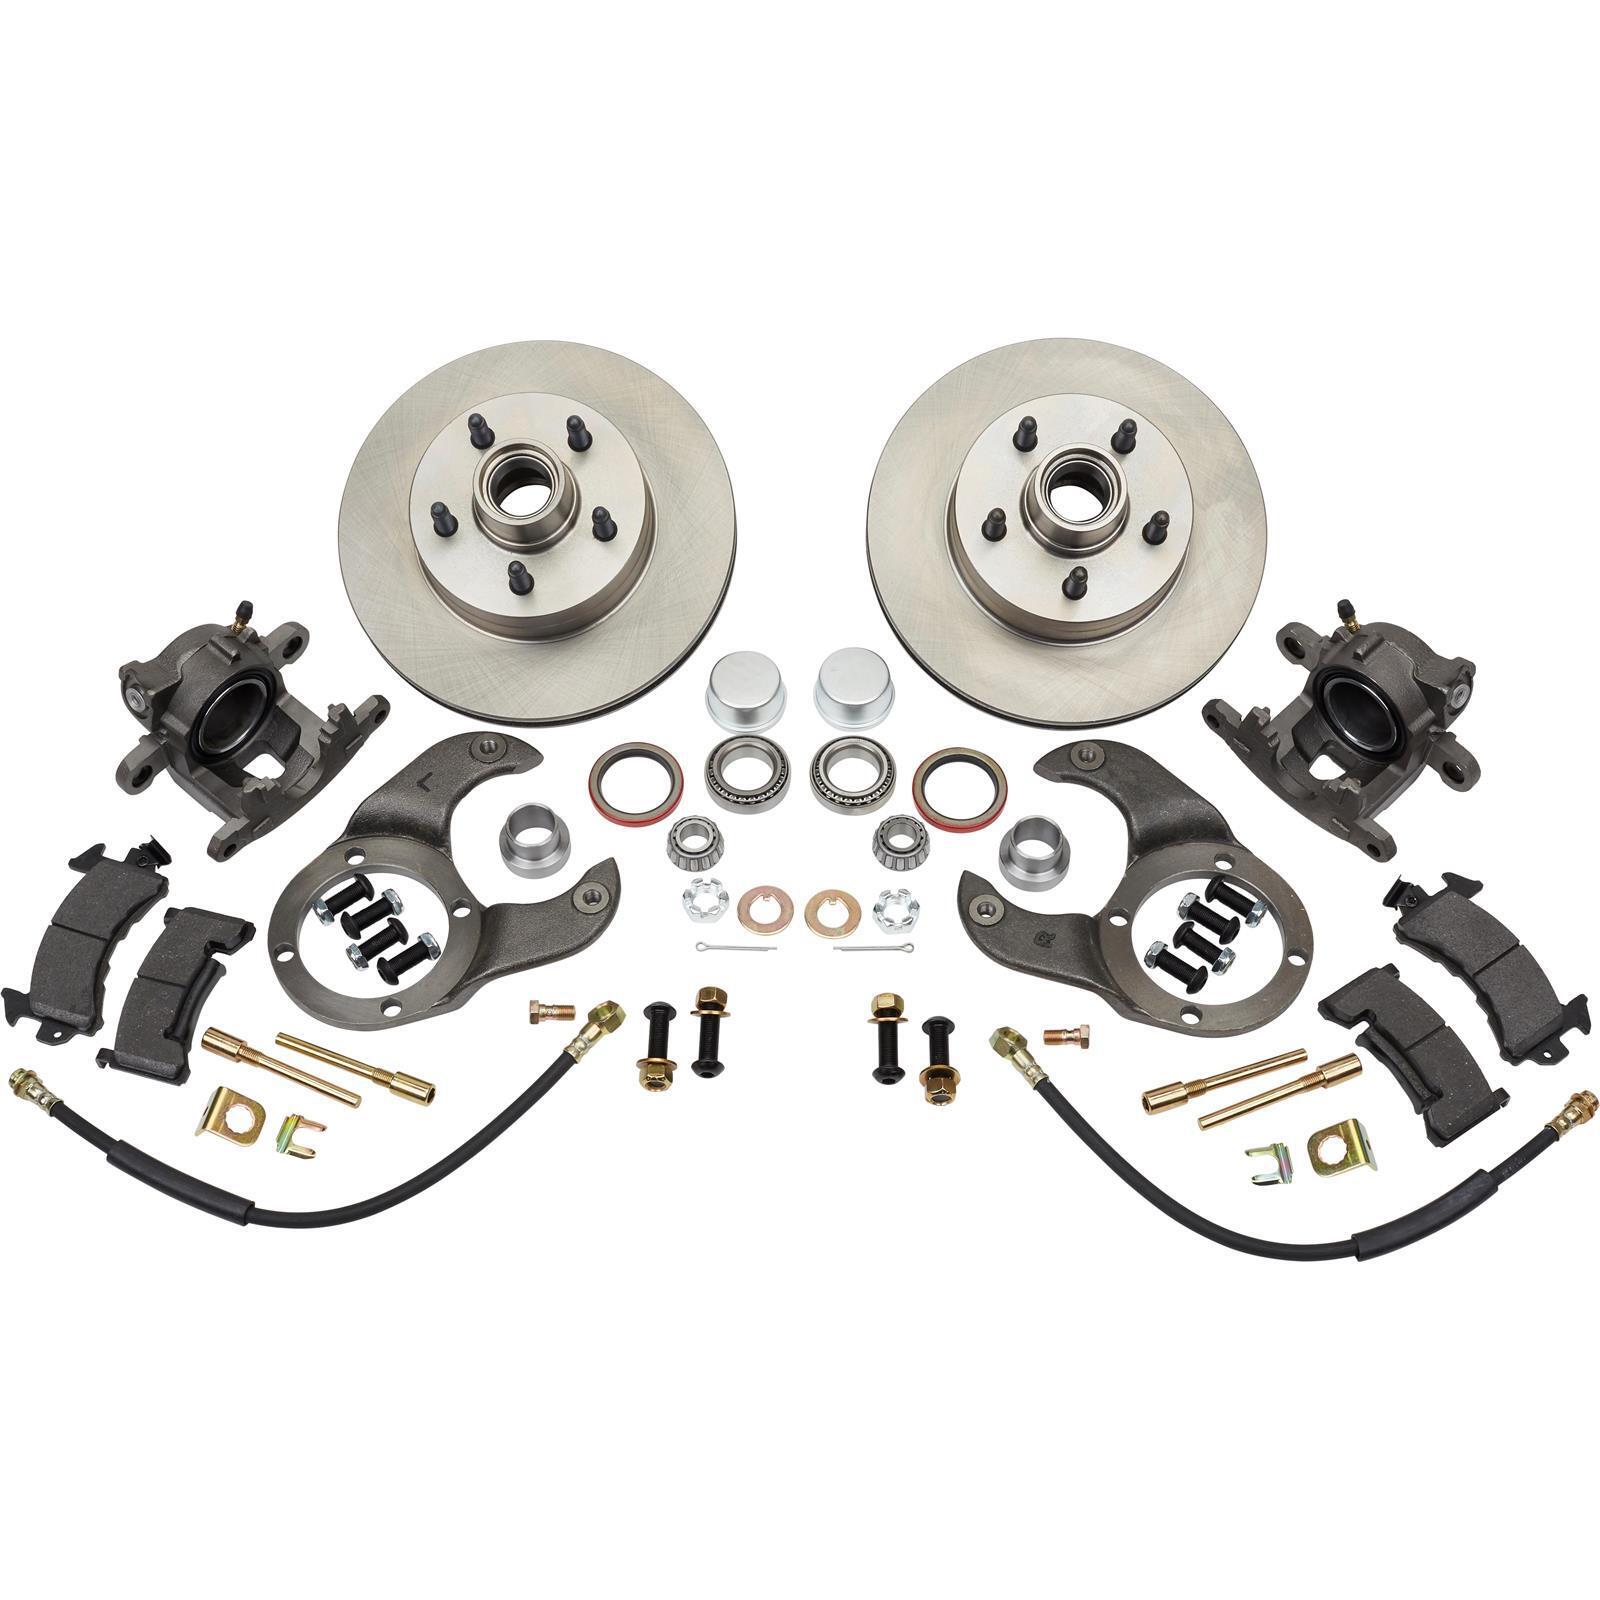 Disc Brake Kit, 5 on 4-1/2, Metric Caliper, Fits Ford 1937-48 Spindle